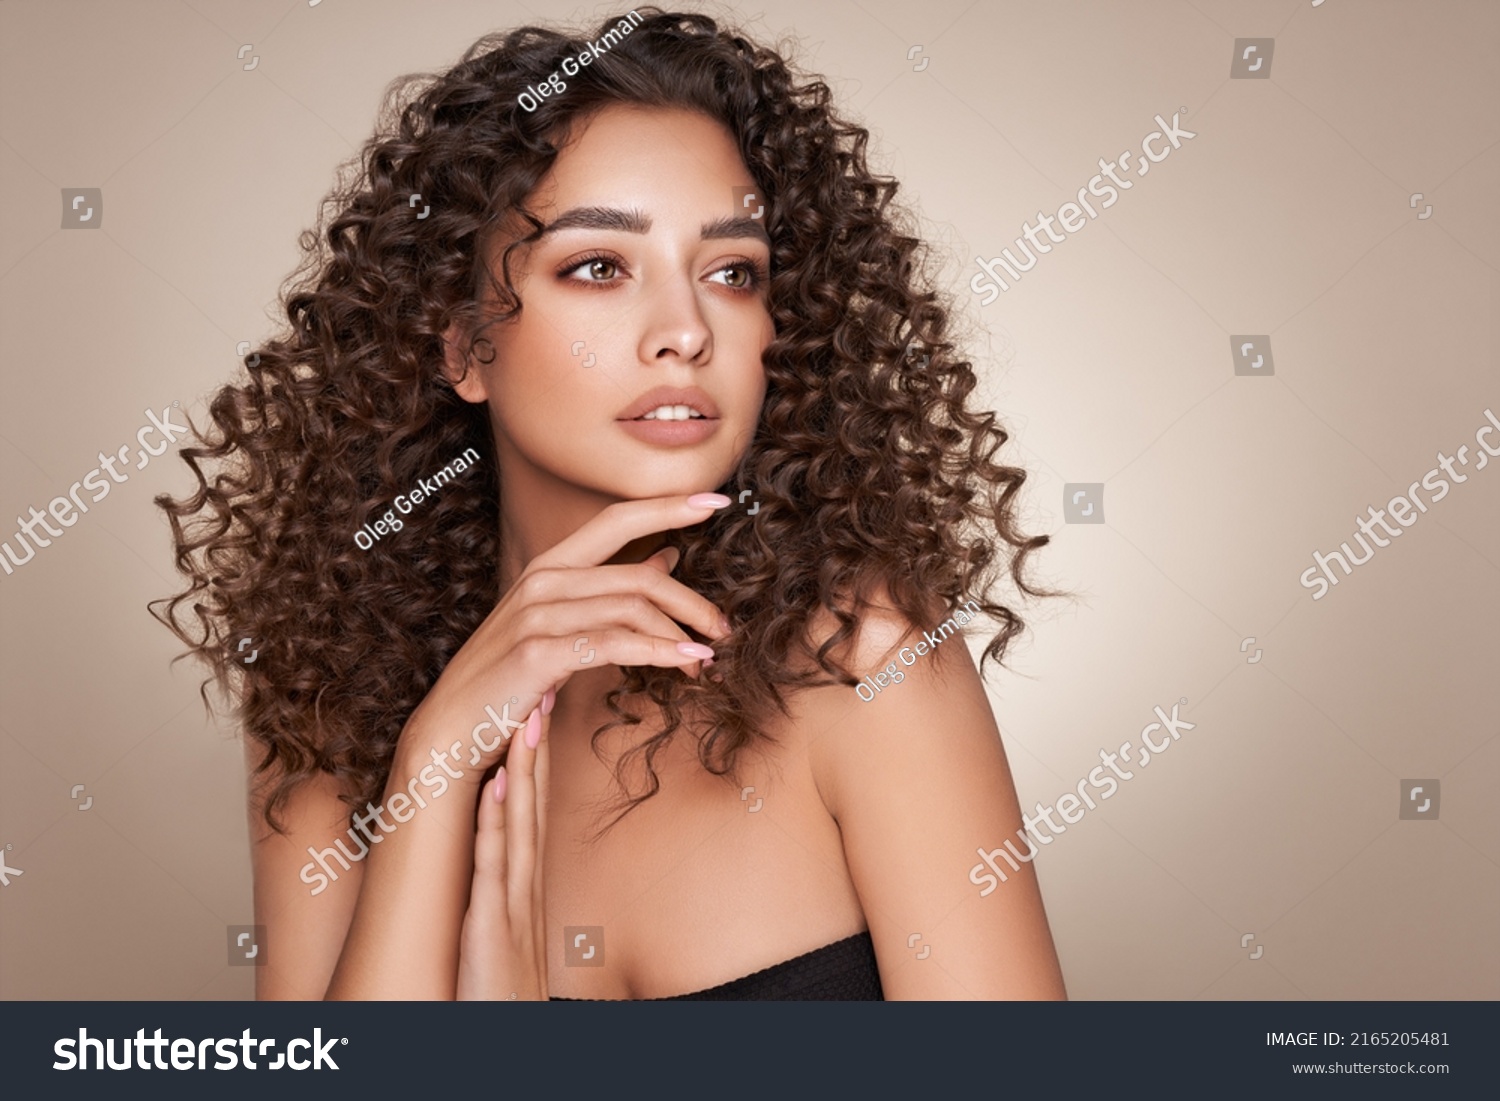 Fashion studio portrait of beautiful smiling woman with afro curls hairstyle. Fashion and beauty #2165205481